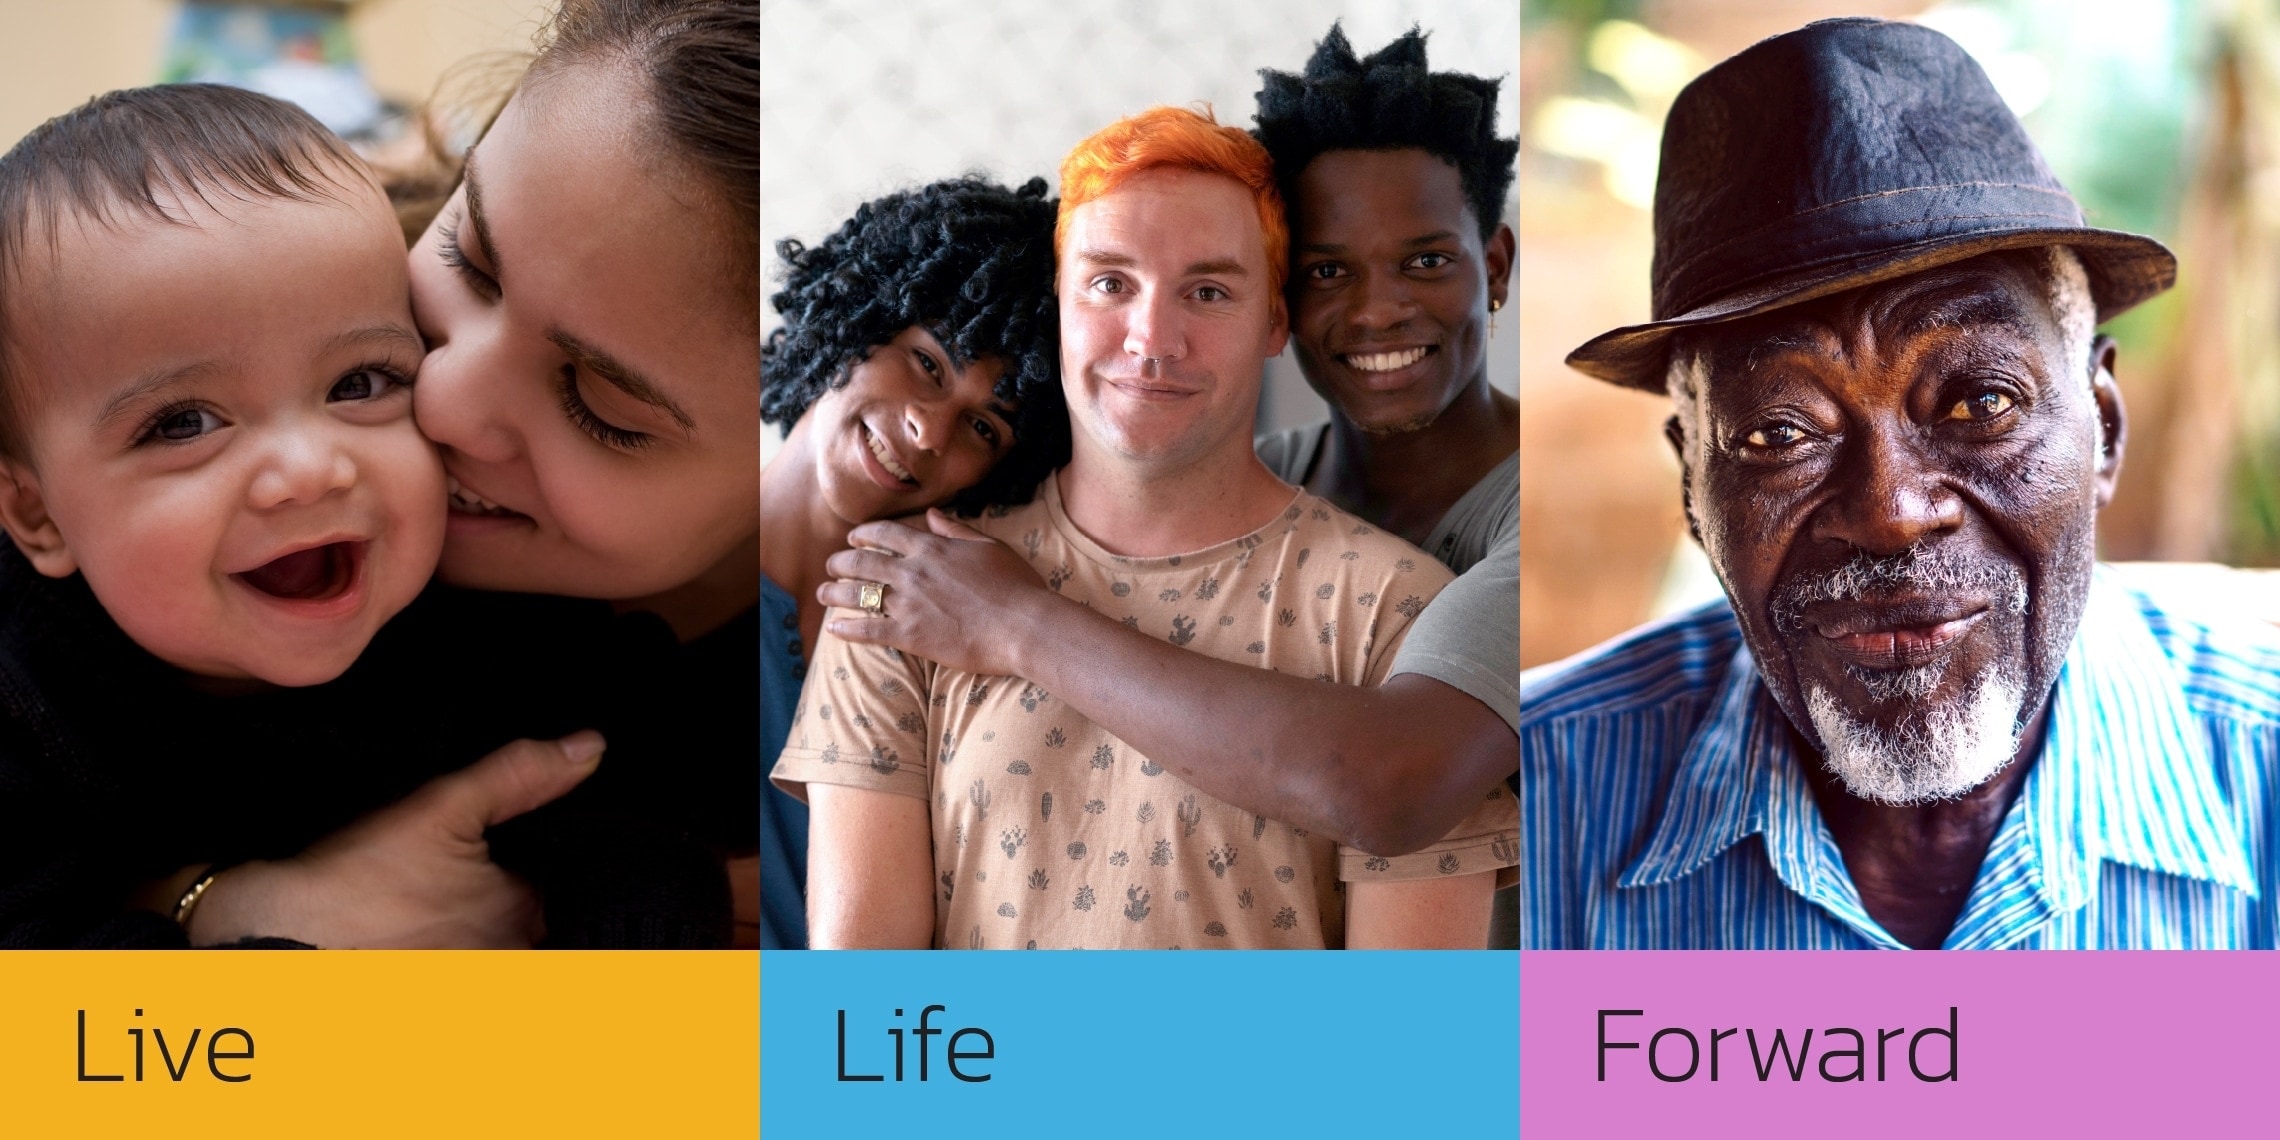 images depicting the tagline "Live life forward": a young woman with a smiling baby in her arms, an interracial group of young men, and an older African-American man.